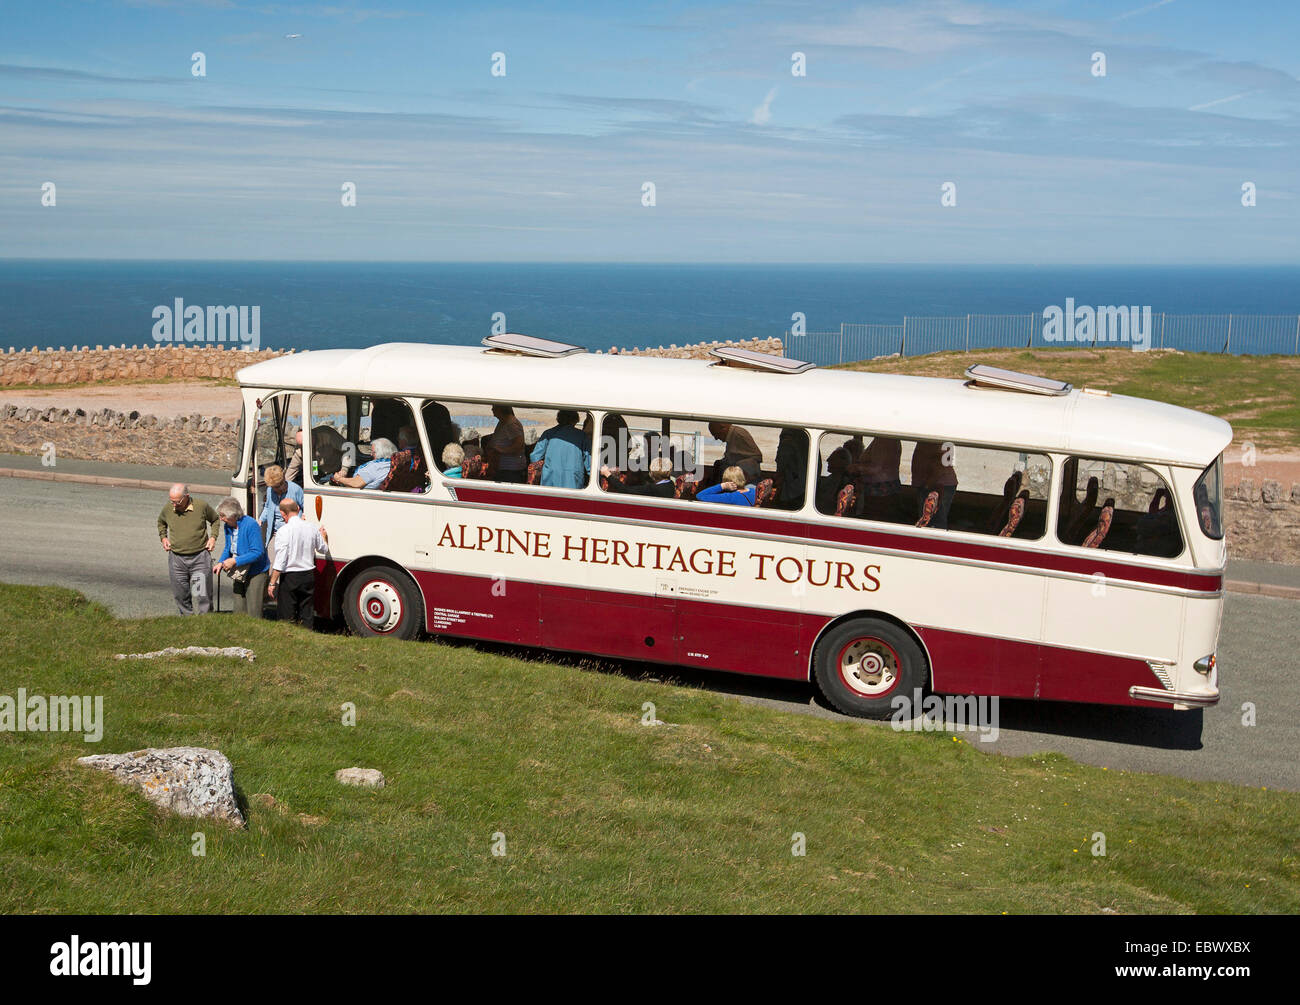 Heritage tour coach / bus with elderly passengers disembarking on Great Orme with blue ocean in background at Llandudno Wales Stock Photo